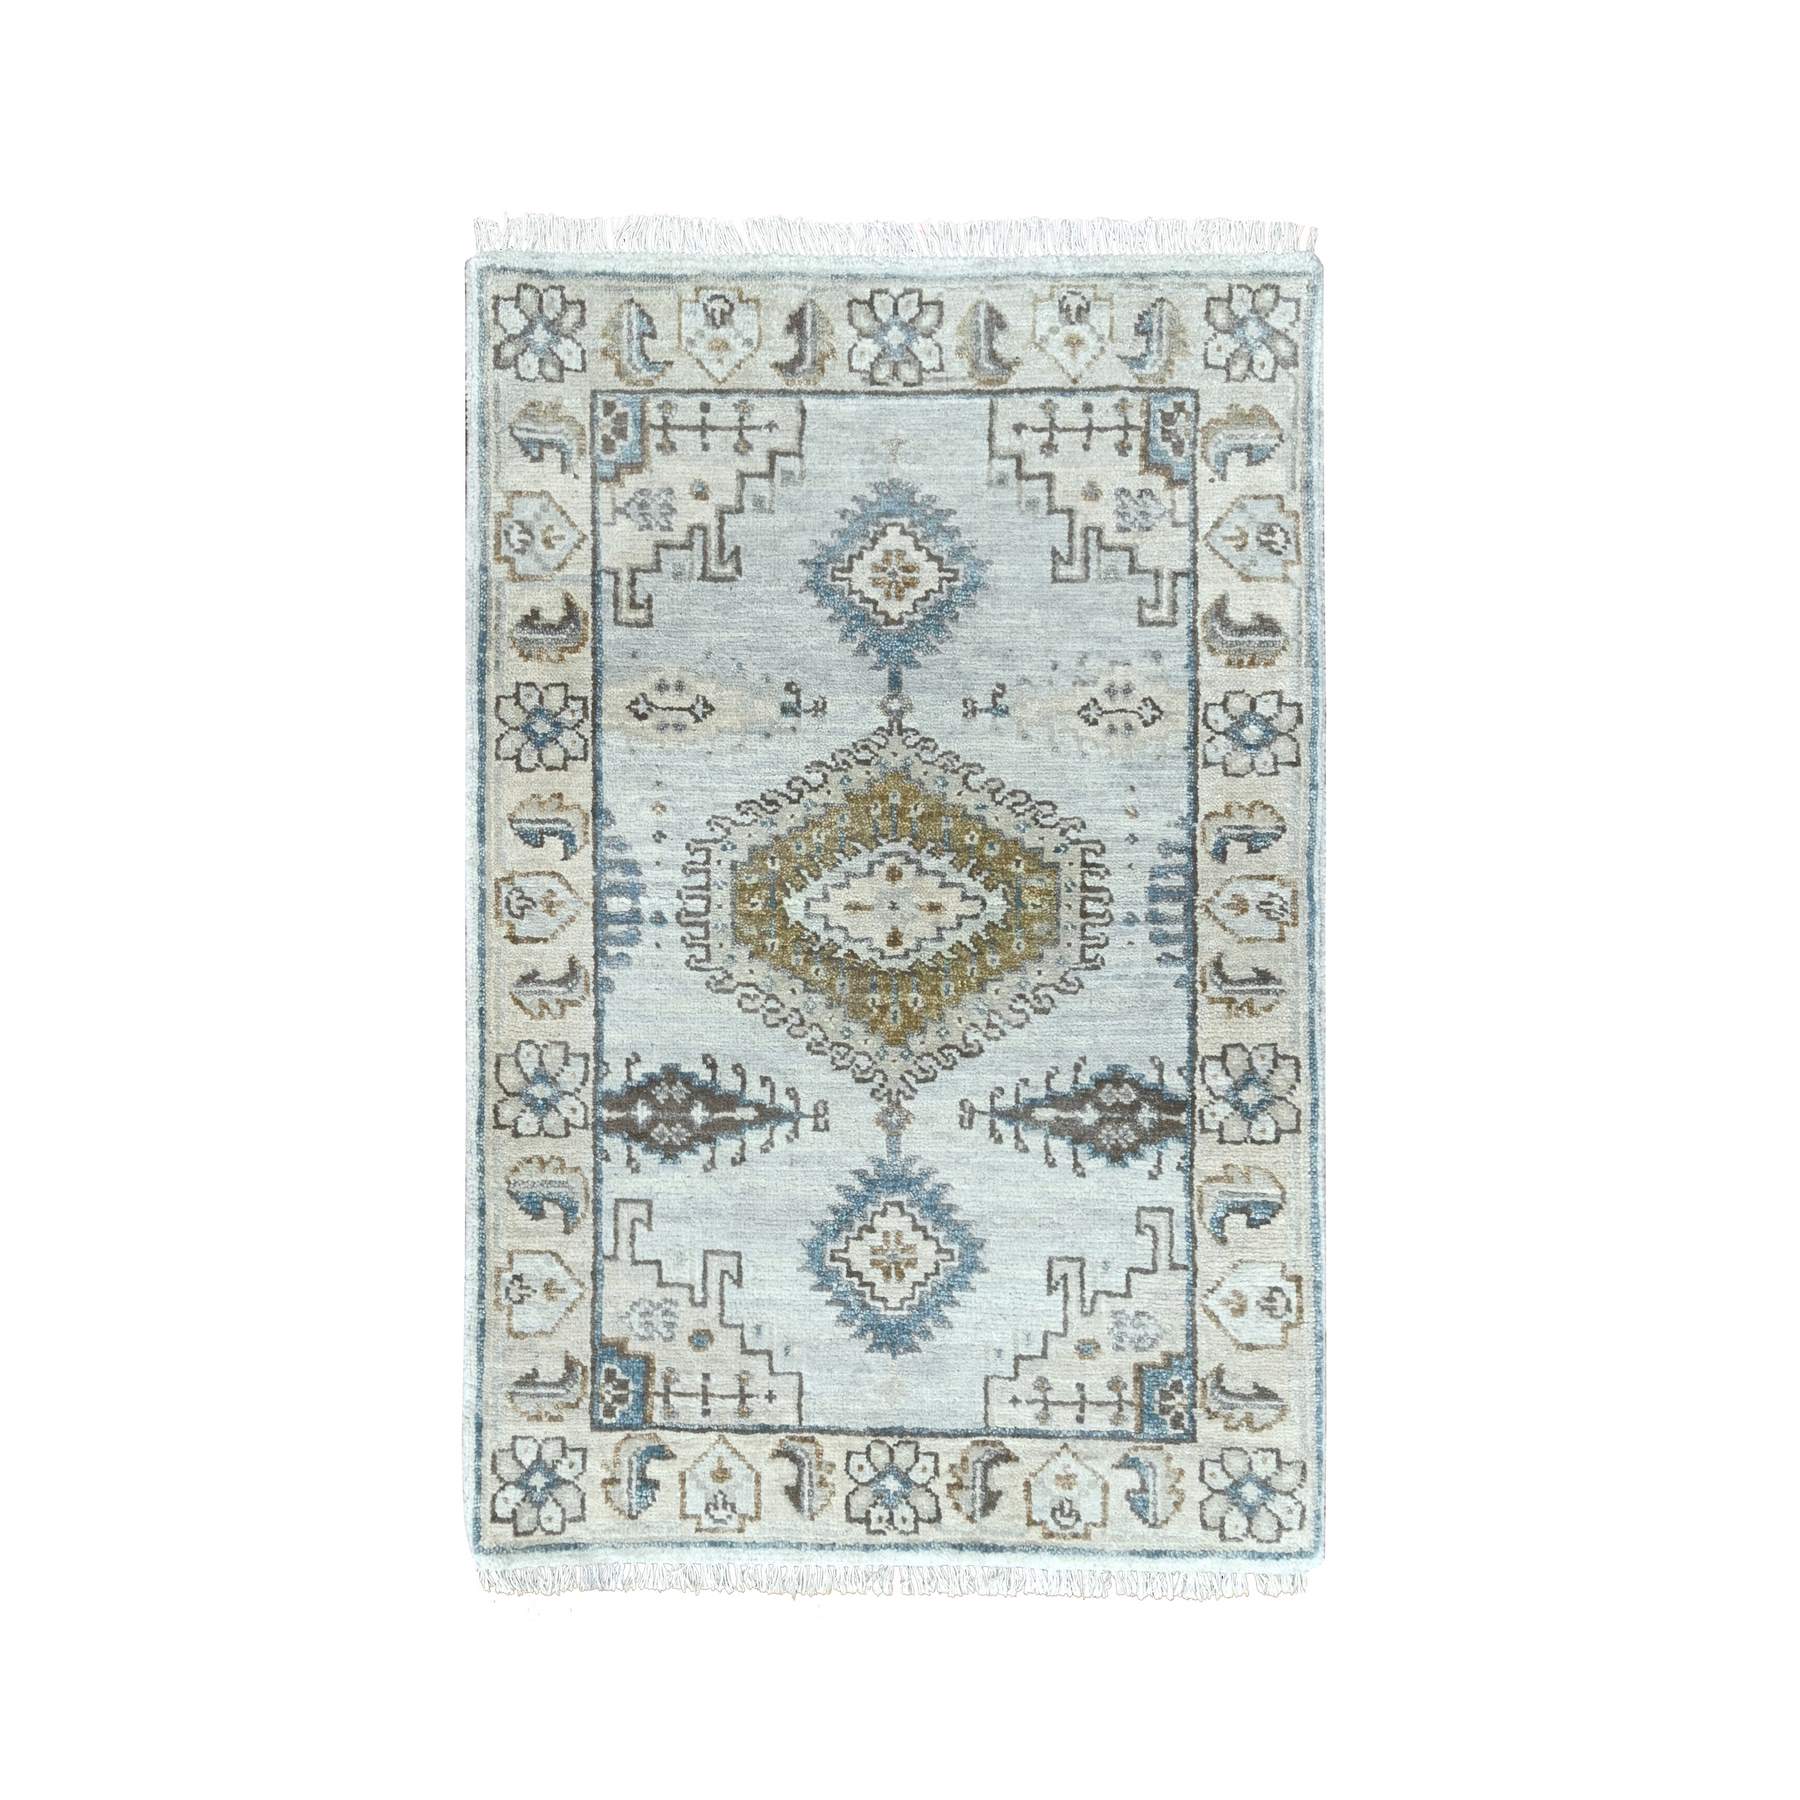 Passive Gray, Densely Woven, Hand Knotted, Persian Village Influence and Geometric Patterns, Natural Dyes, Vibrant and Soft Wool, Mat Oriental Rug